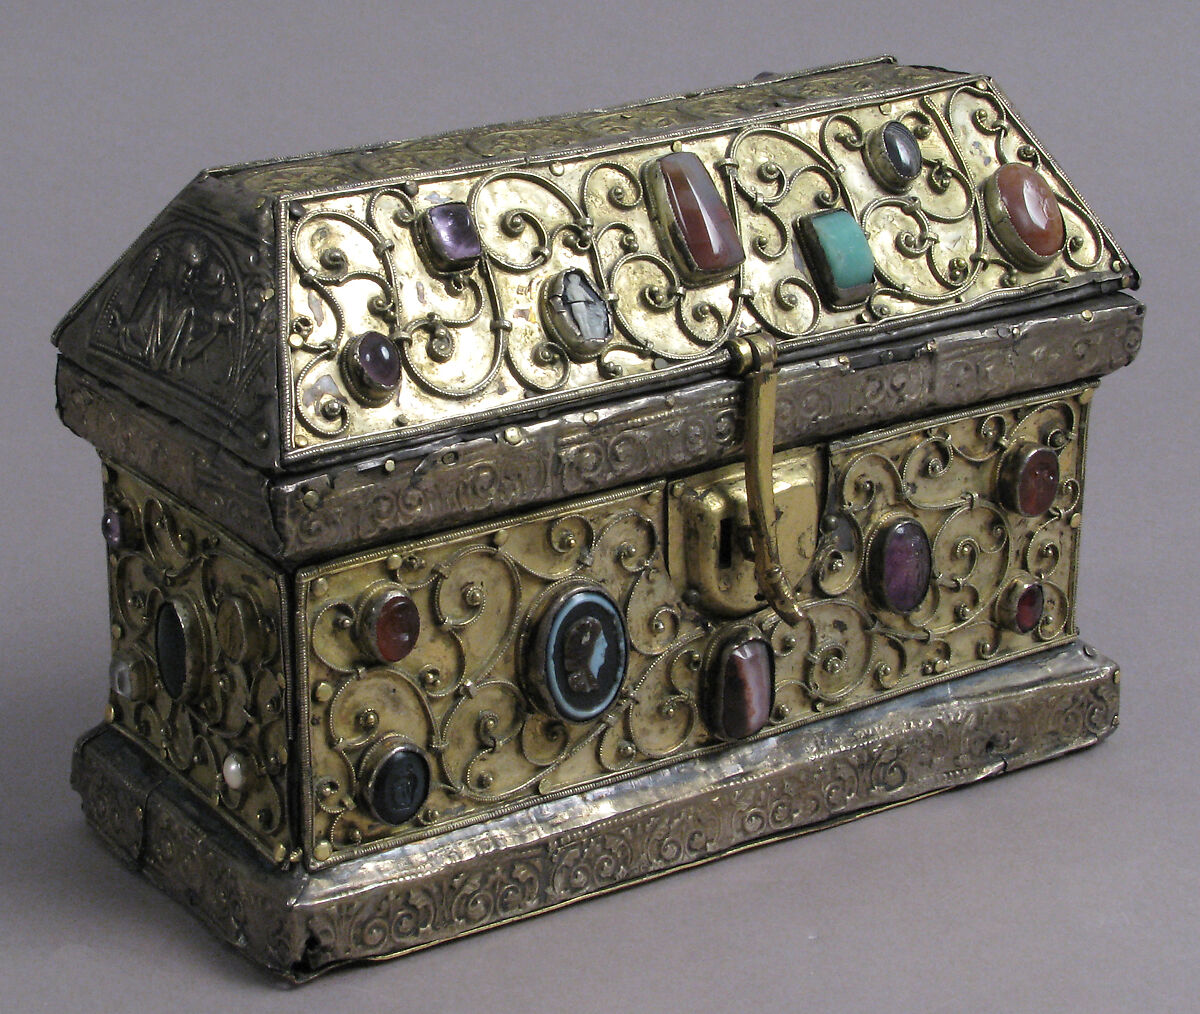 Chasse, Silver-gilt, wood, gems, intaglio, cameo over wood core, German 